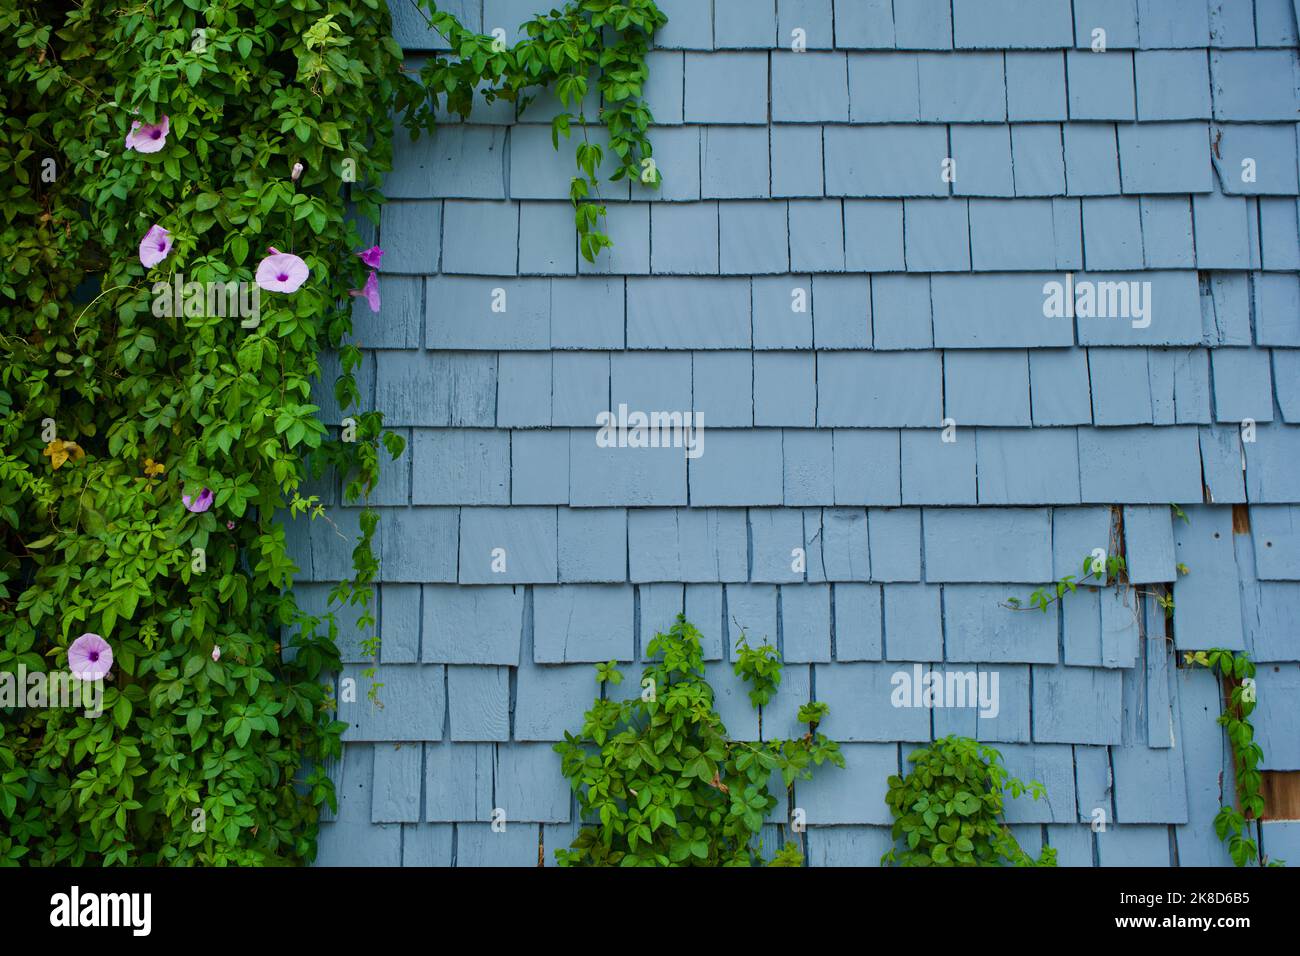 Straight on view of small purple flowers on a green vine growing organically on a wall with blue shingles. Stock Photo